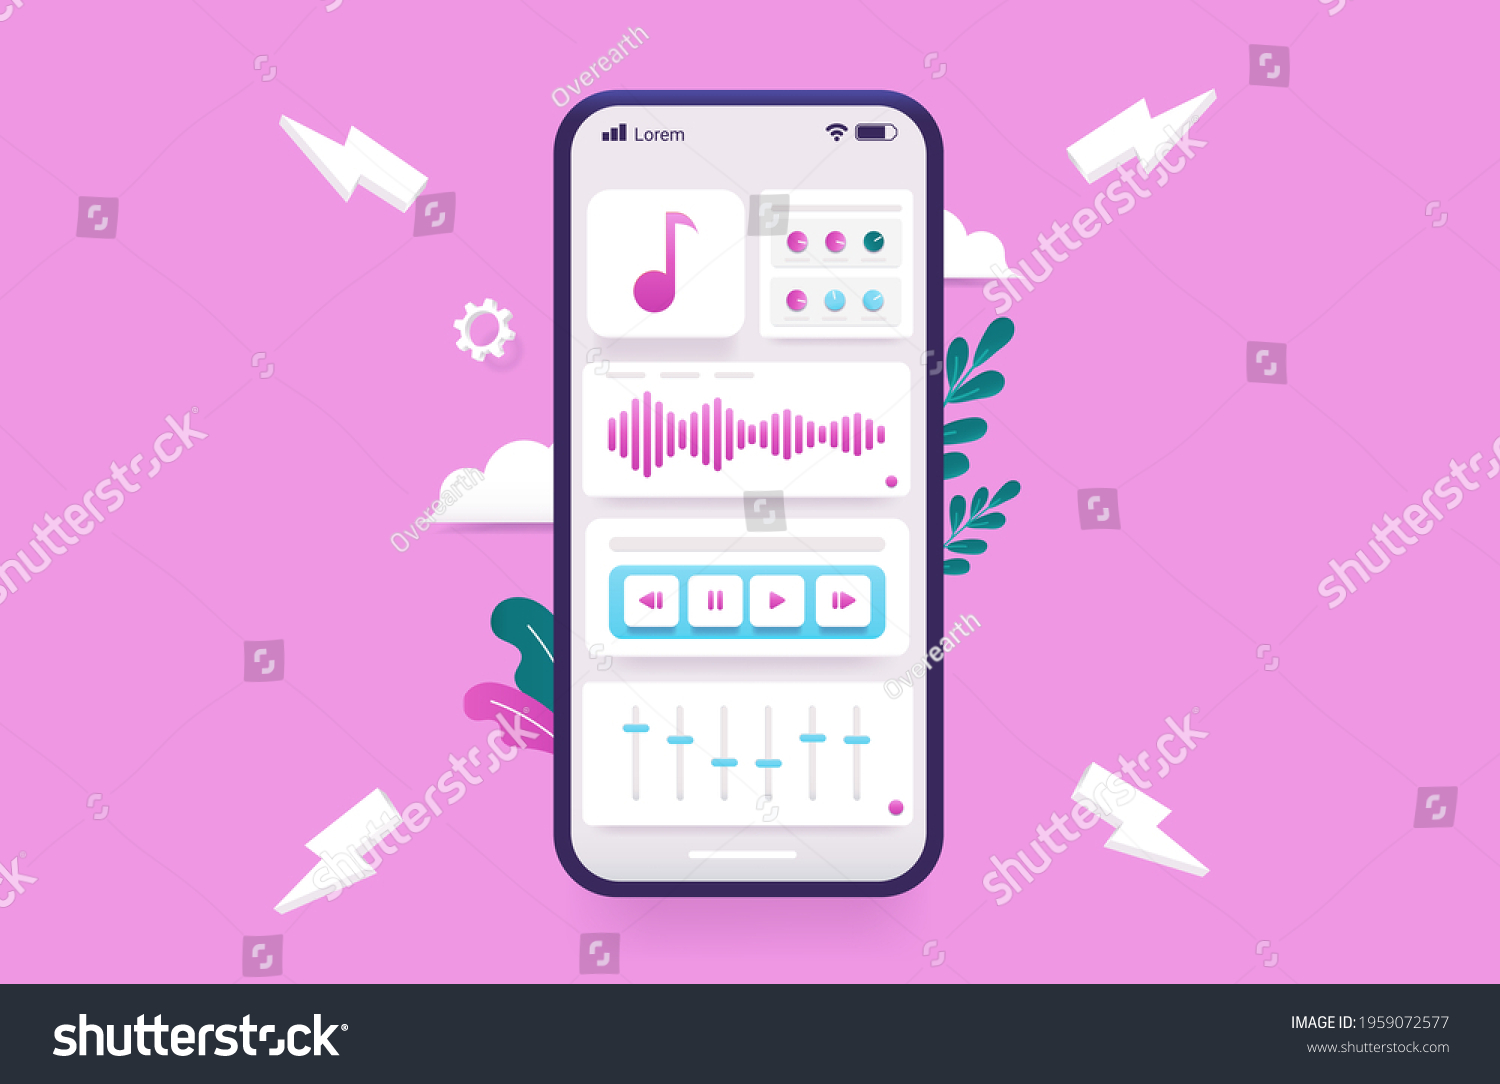 SVG of Creating music on smartphone - Mobile phone with audio production app and pink background. Vector illustration. svg